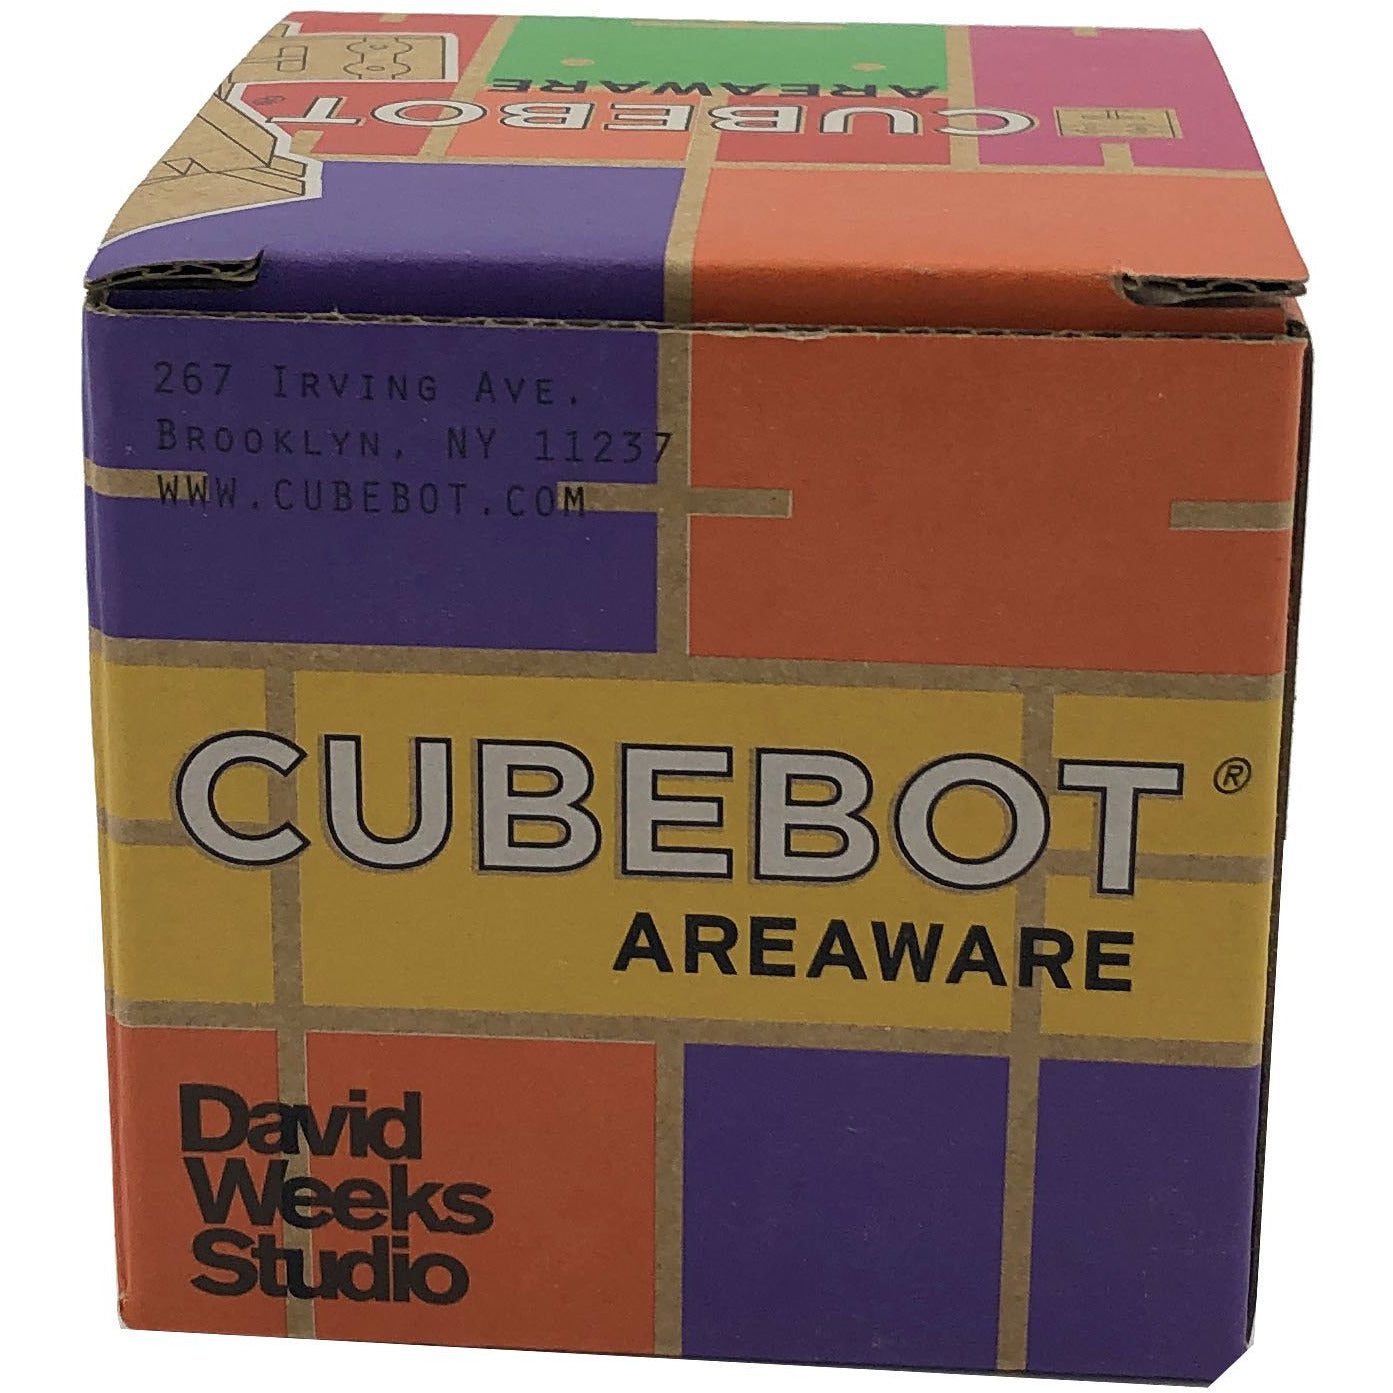 Studio Areaware Micro Cubebot / Wooden Toy Puzzle / Minature Toy / Multicoloured / Toy /